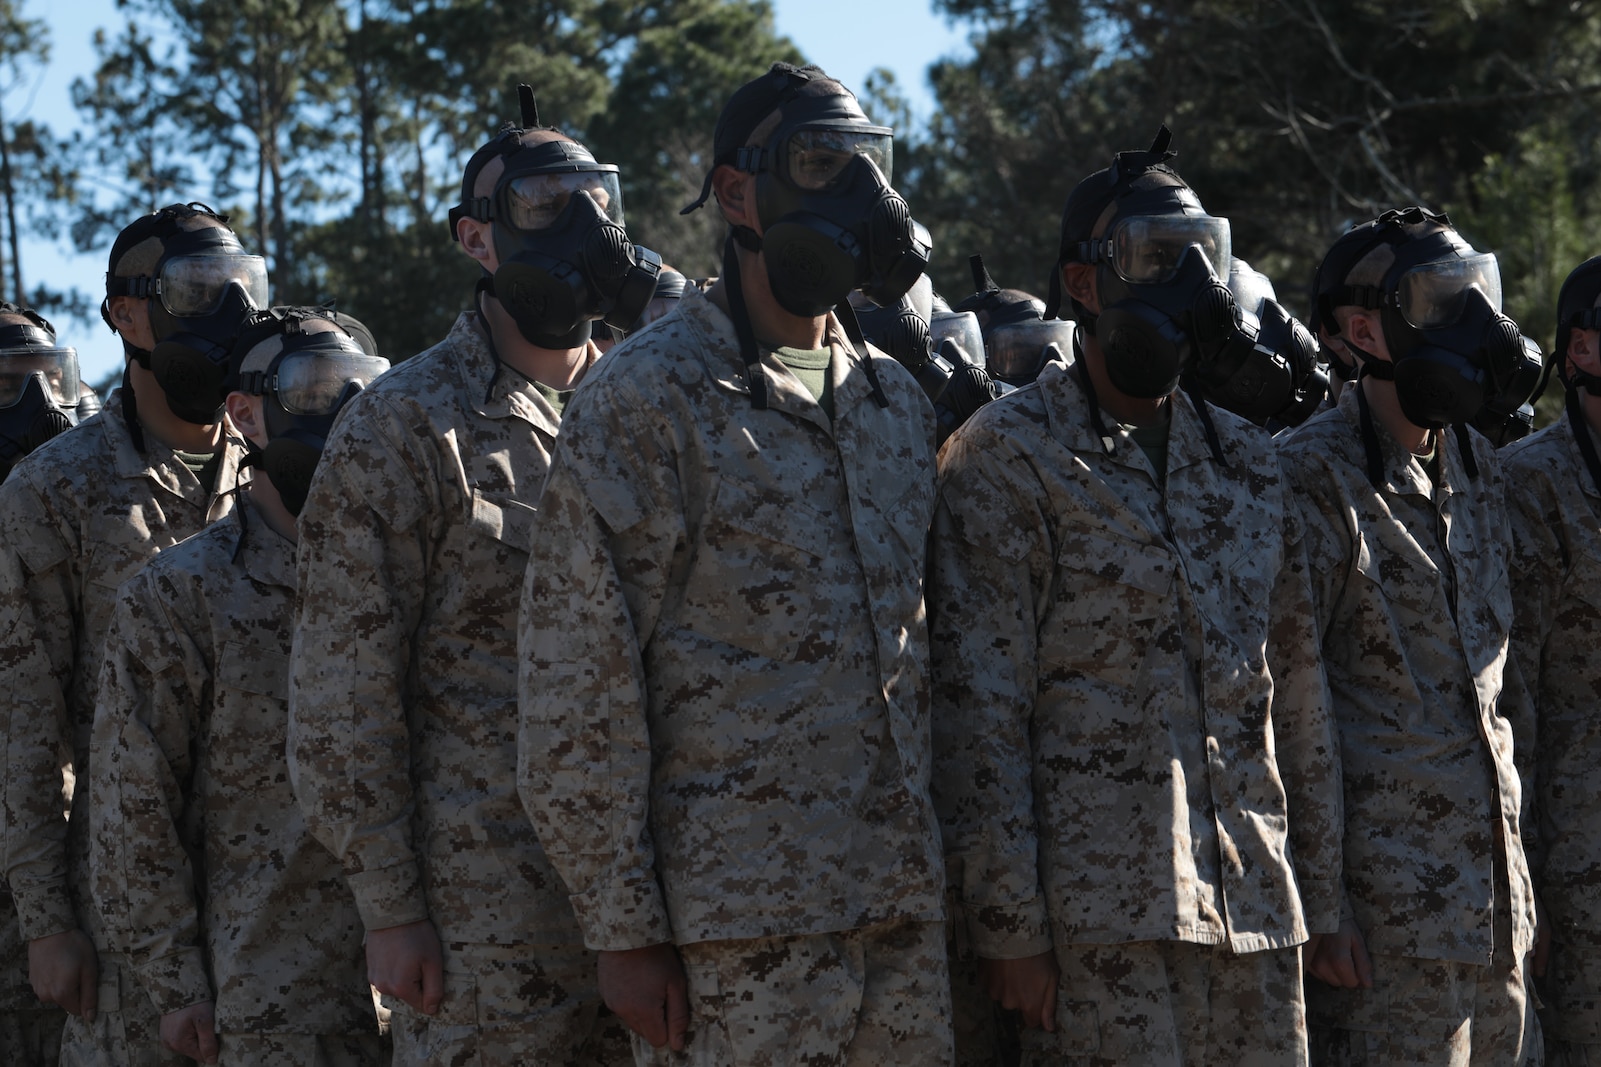 Recruits with Fox Company, 2nd Recruit Training Battalion, wait to enter the gas chamber before performing chemical, biological, radiological, and nuclear (CBRN) defense training at Marine Corps Recruit Depot Parris Island, S.C., Jan. 6, 2020. Training for CBRN defense is an event in which recruits are exposed to CS gas, in order to familiarize themselves with the use of a gasmask. (U.S. Marine Corps photo by Lance Cpl. Dylan Walters)